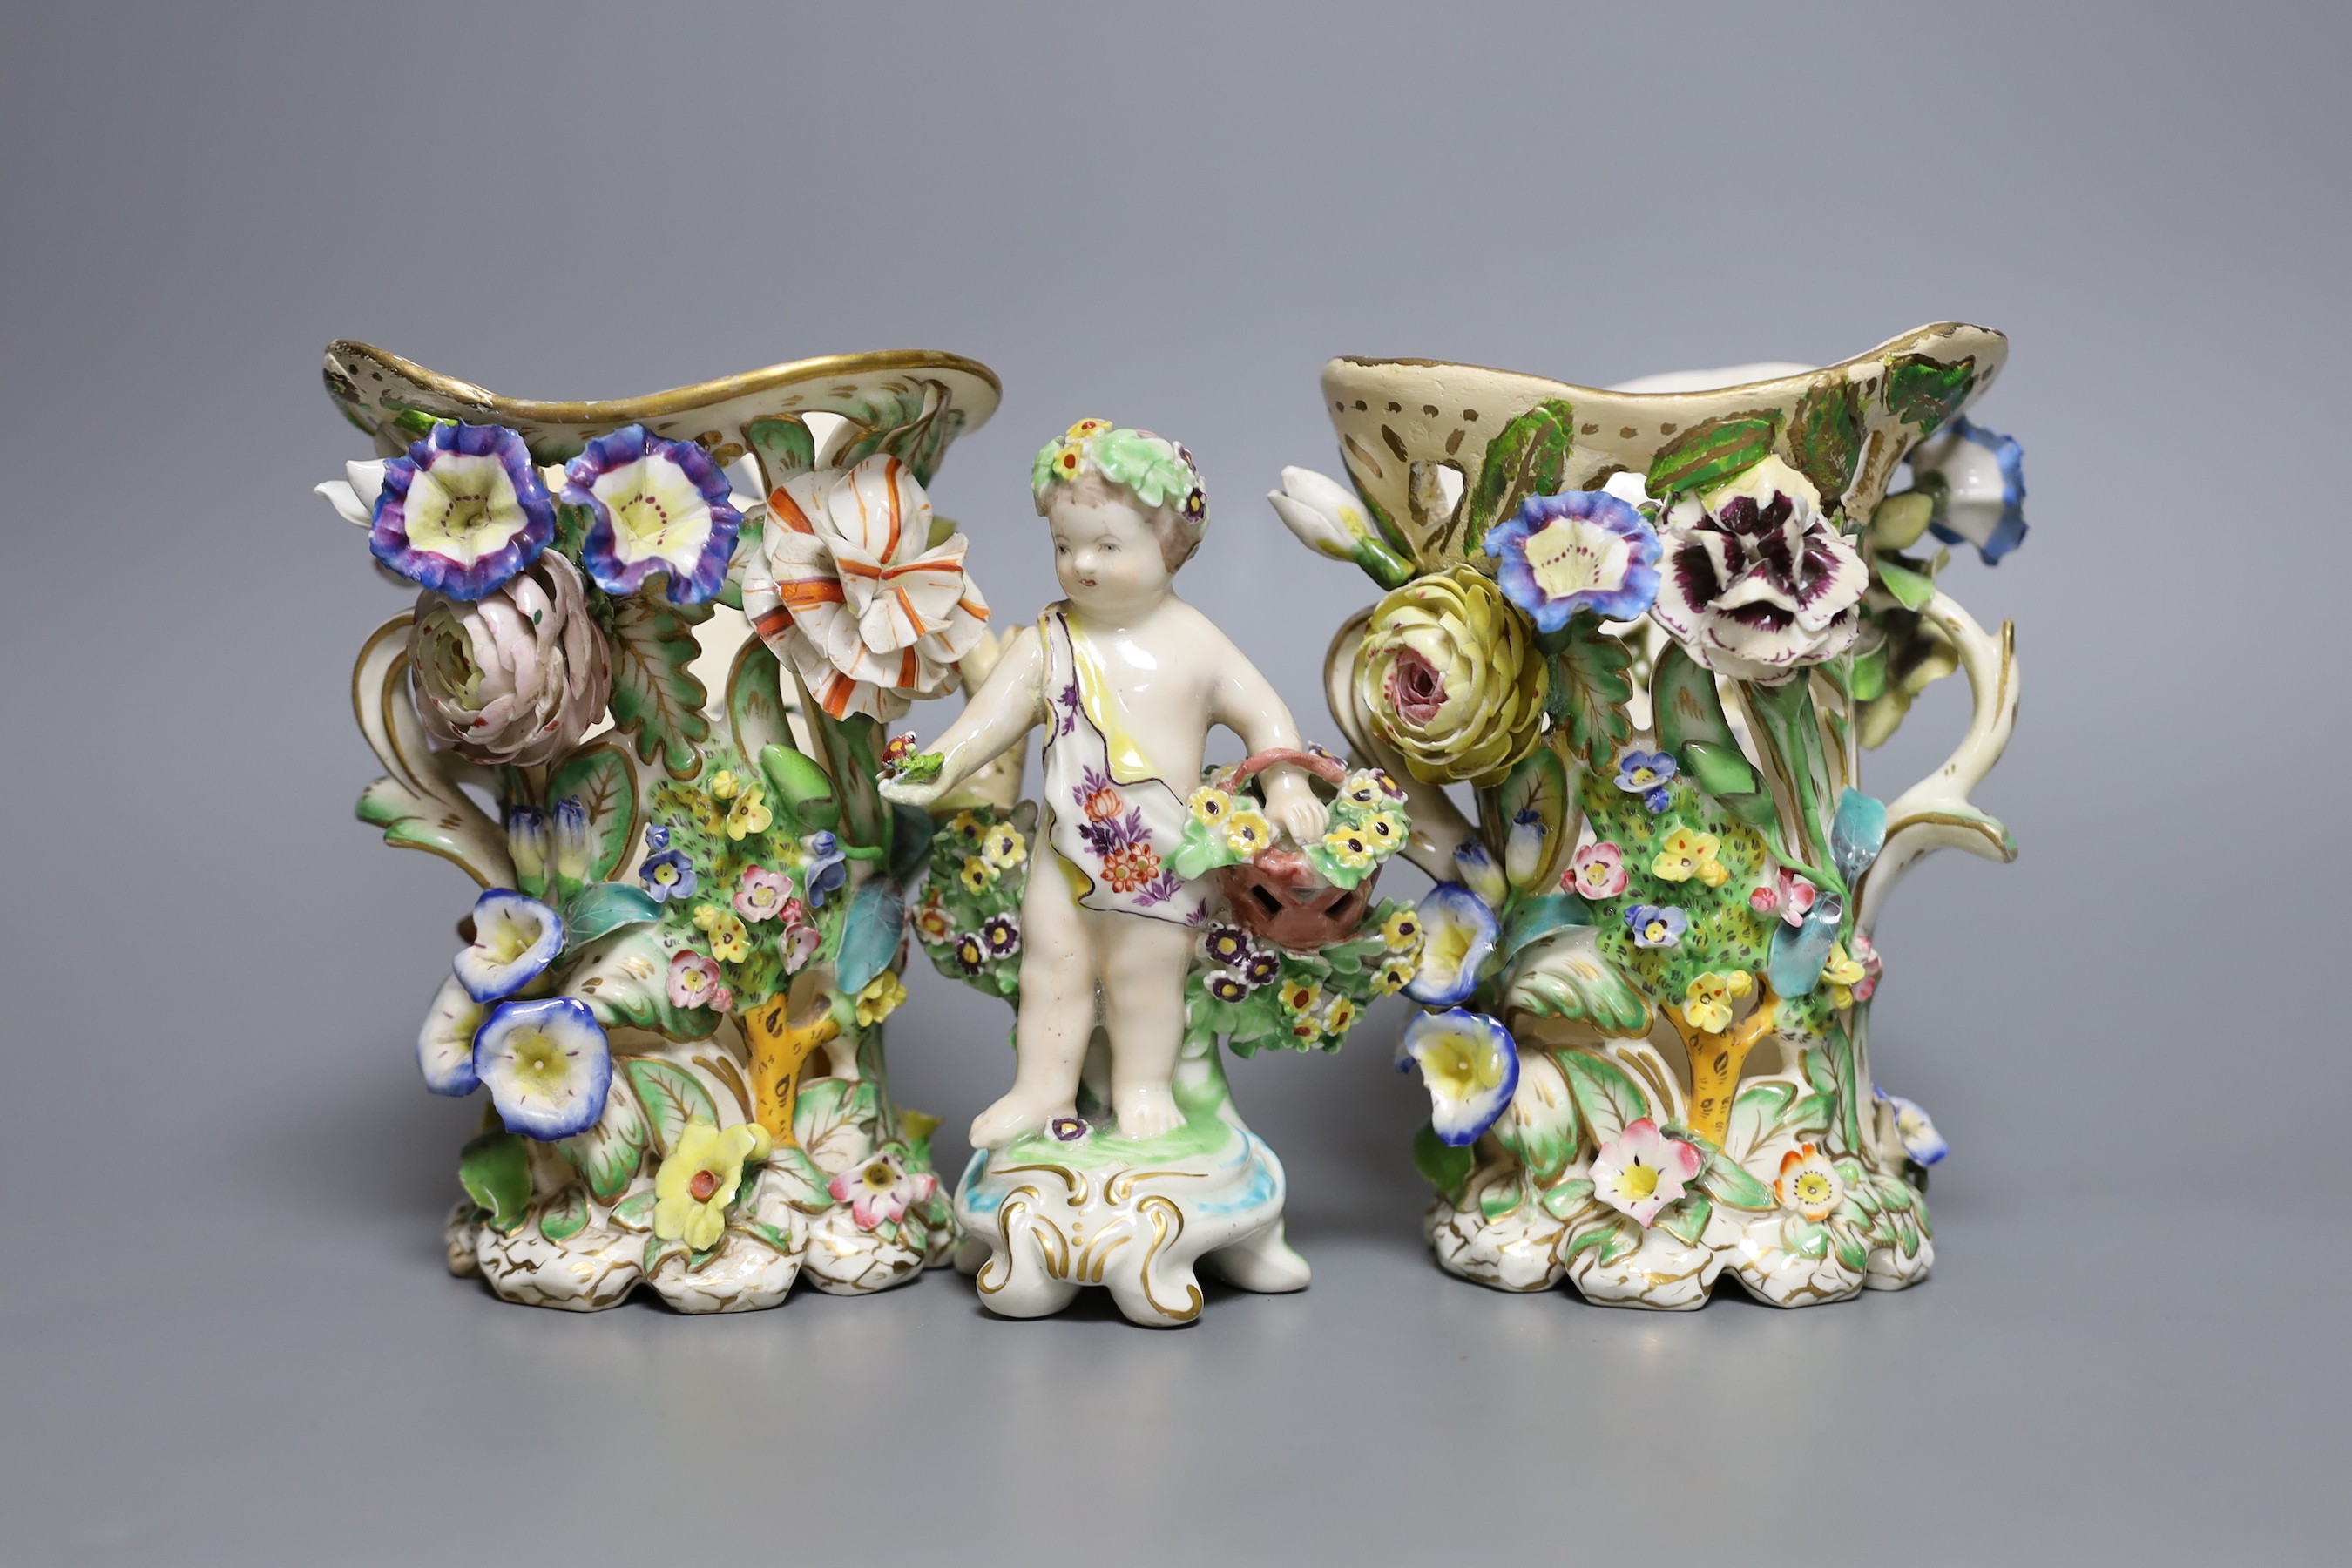 A 19th century Derby figure of a putti with flowers together with two floral encrusted porcelain vases, tallest 14cm